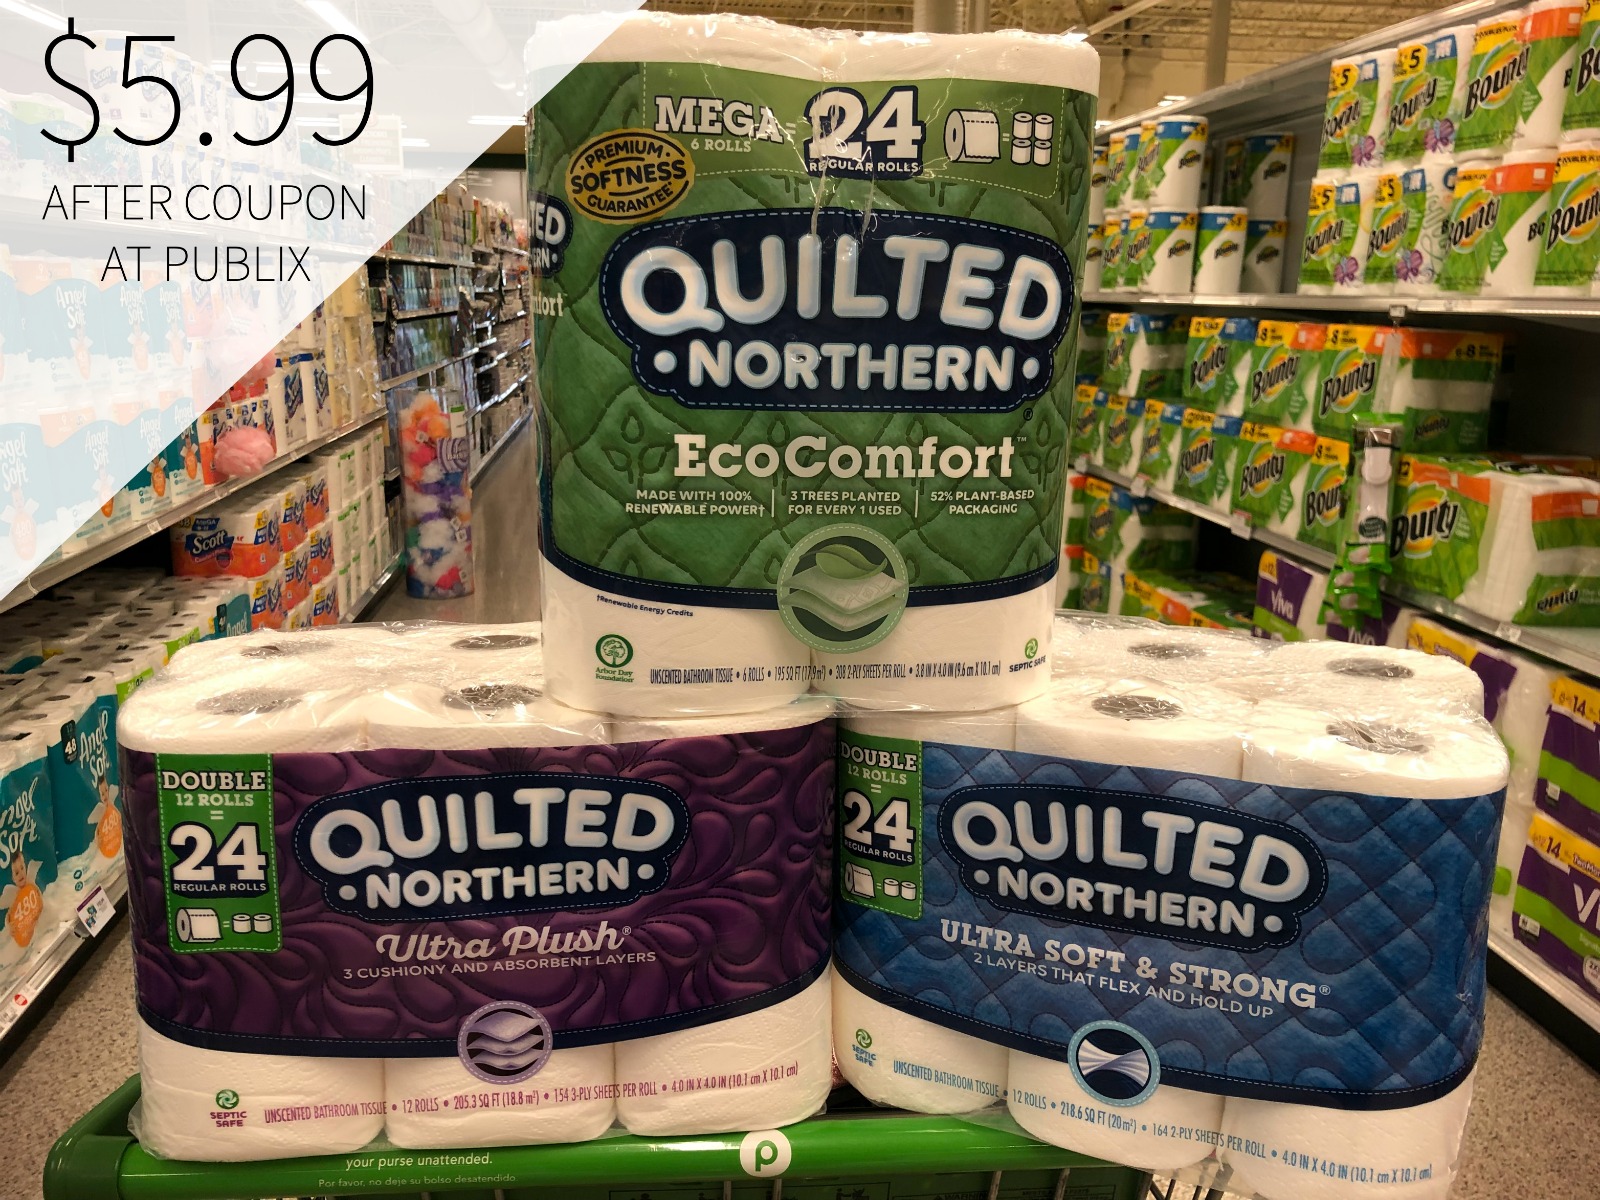 Awesome Deal On Quilted Northern® Bathroom Tissue This Week At Publix on I Heart Publix 1